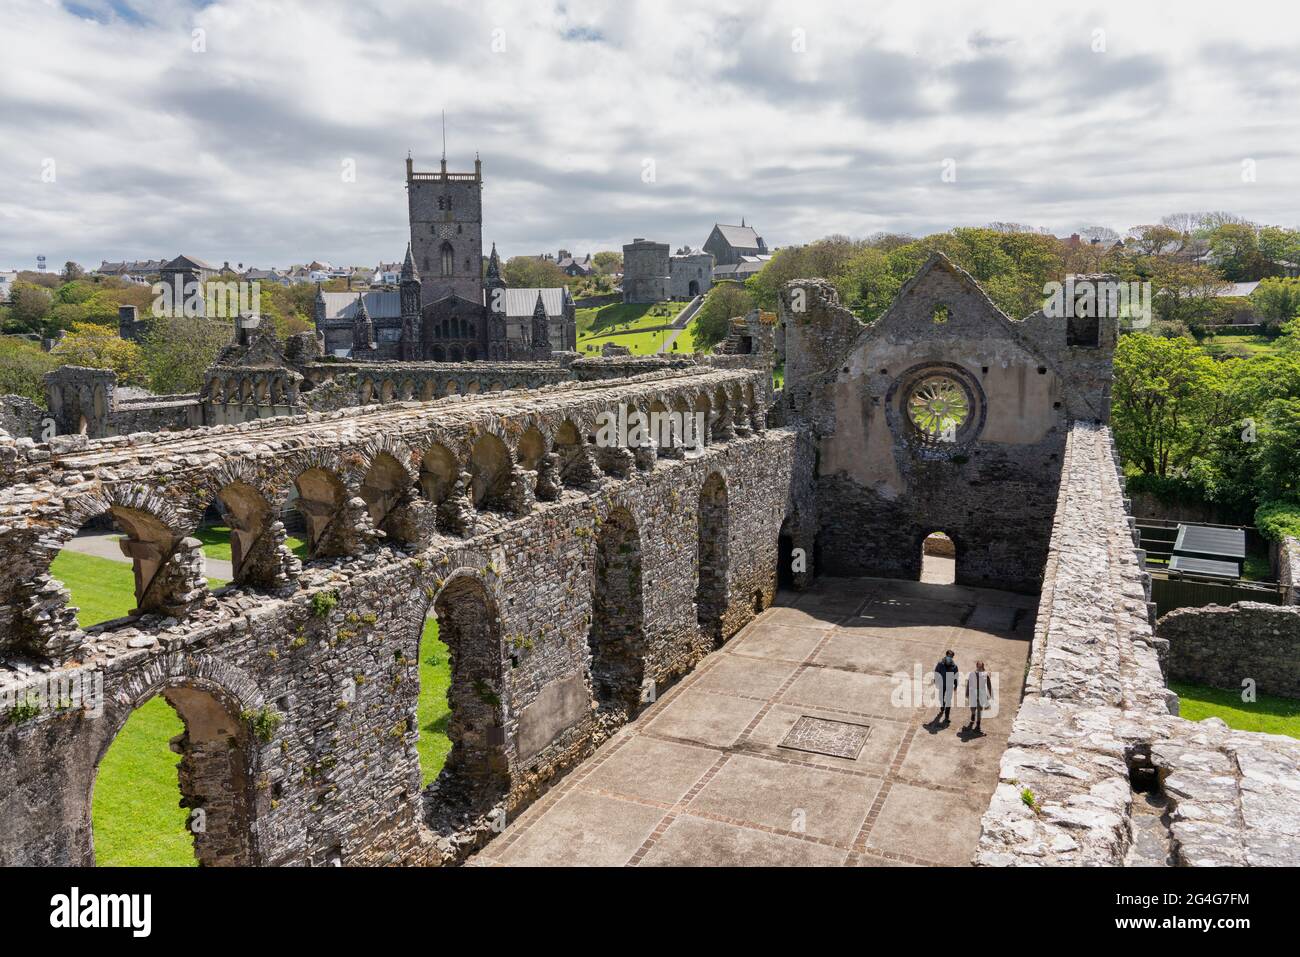 Great Hall of the Bishop's Palace in St. David's Cathedral in Pembrokeshire South Wales, Großbritannien, mit seiner markanten Arkadenumhausung Stockfoto